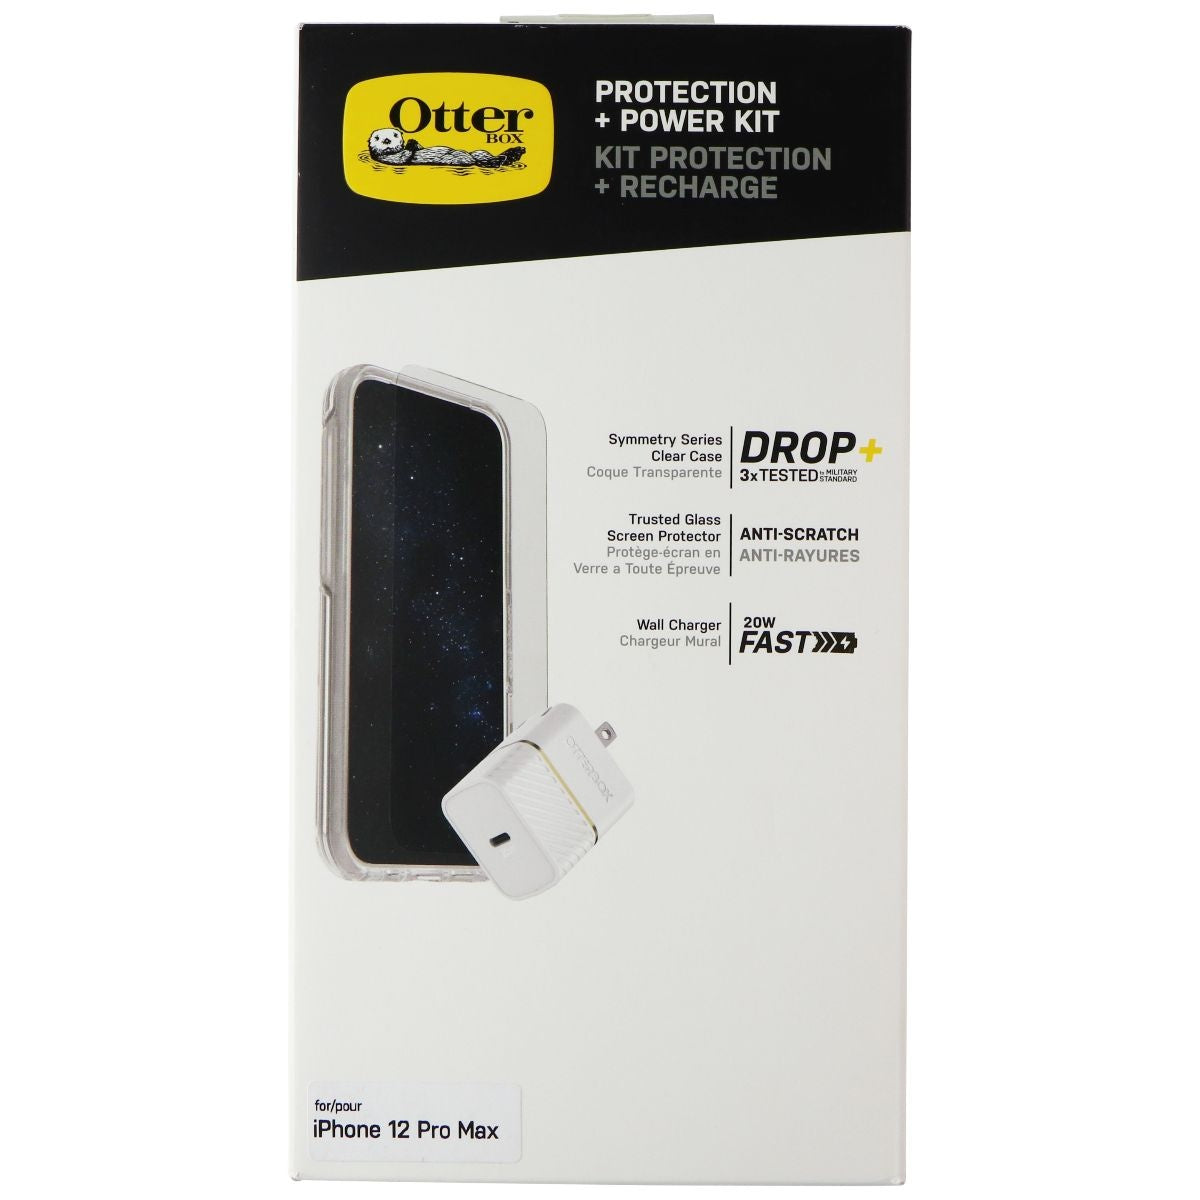 Otterbox Symmetry Clear Protection + Power Kit Bundle for iPhone 12 Pro Max